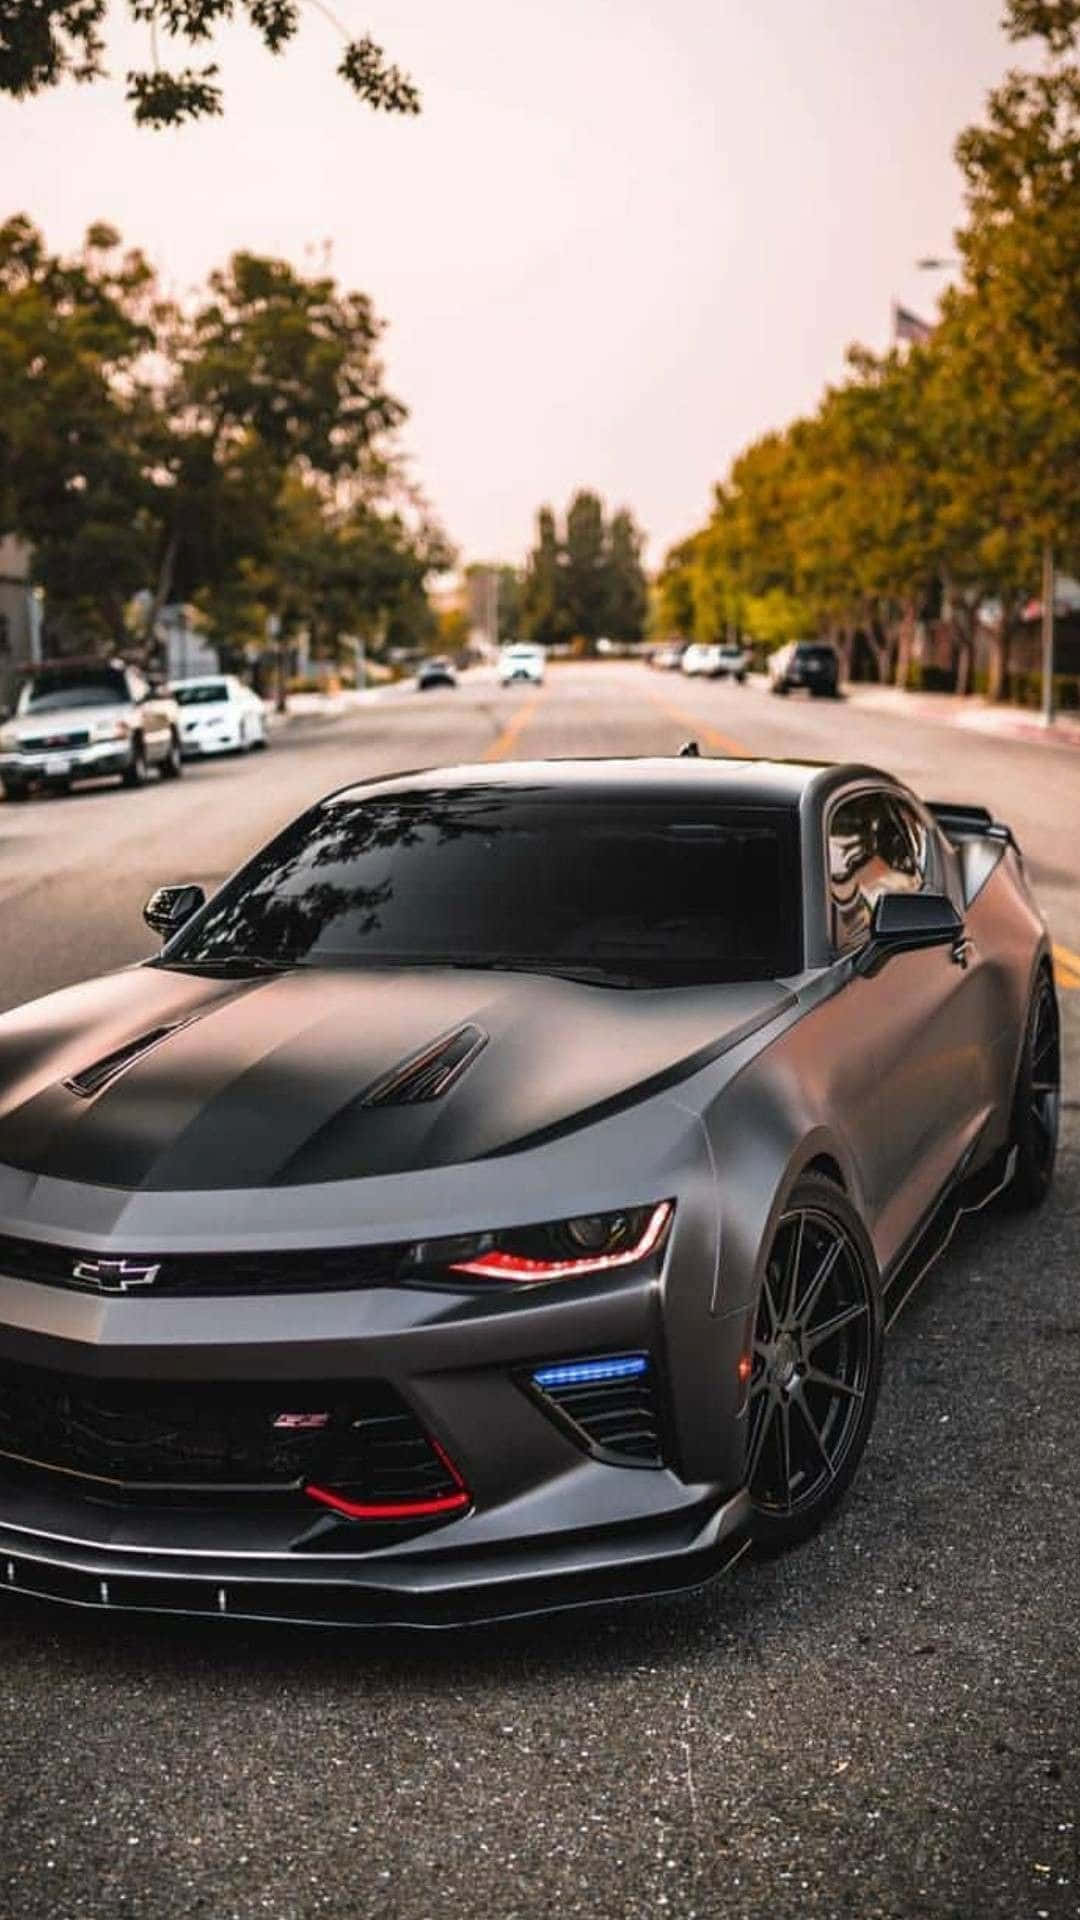 Get Ready to Feel the Rush with a Cool Camaro Wallpaper